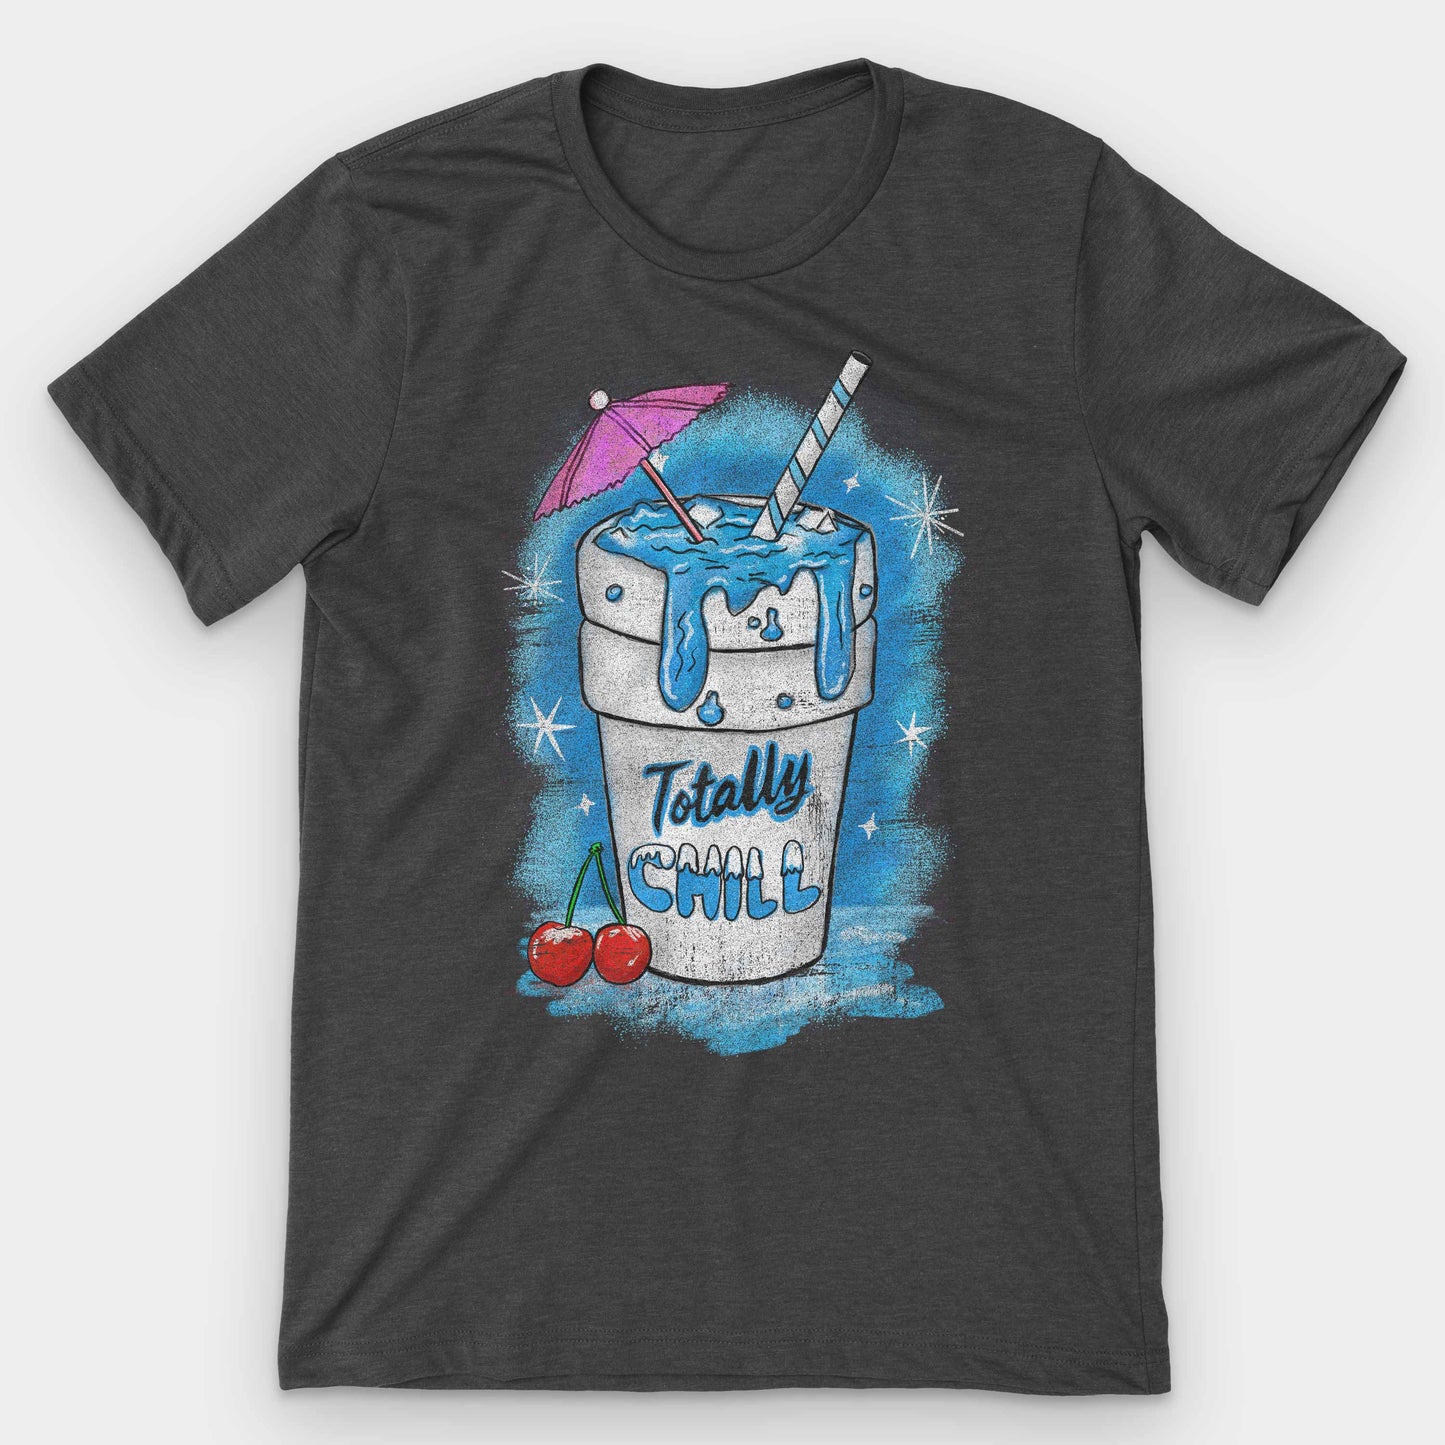 Dark Grey Heather Totally Chill Graphic T-Shirt by Snaxtime